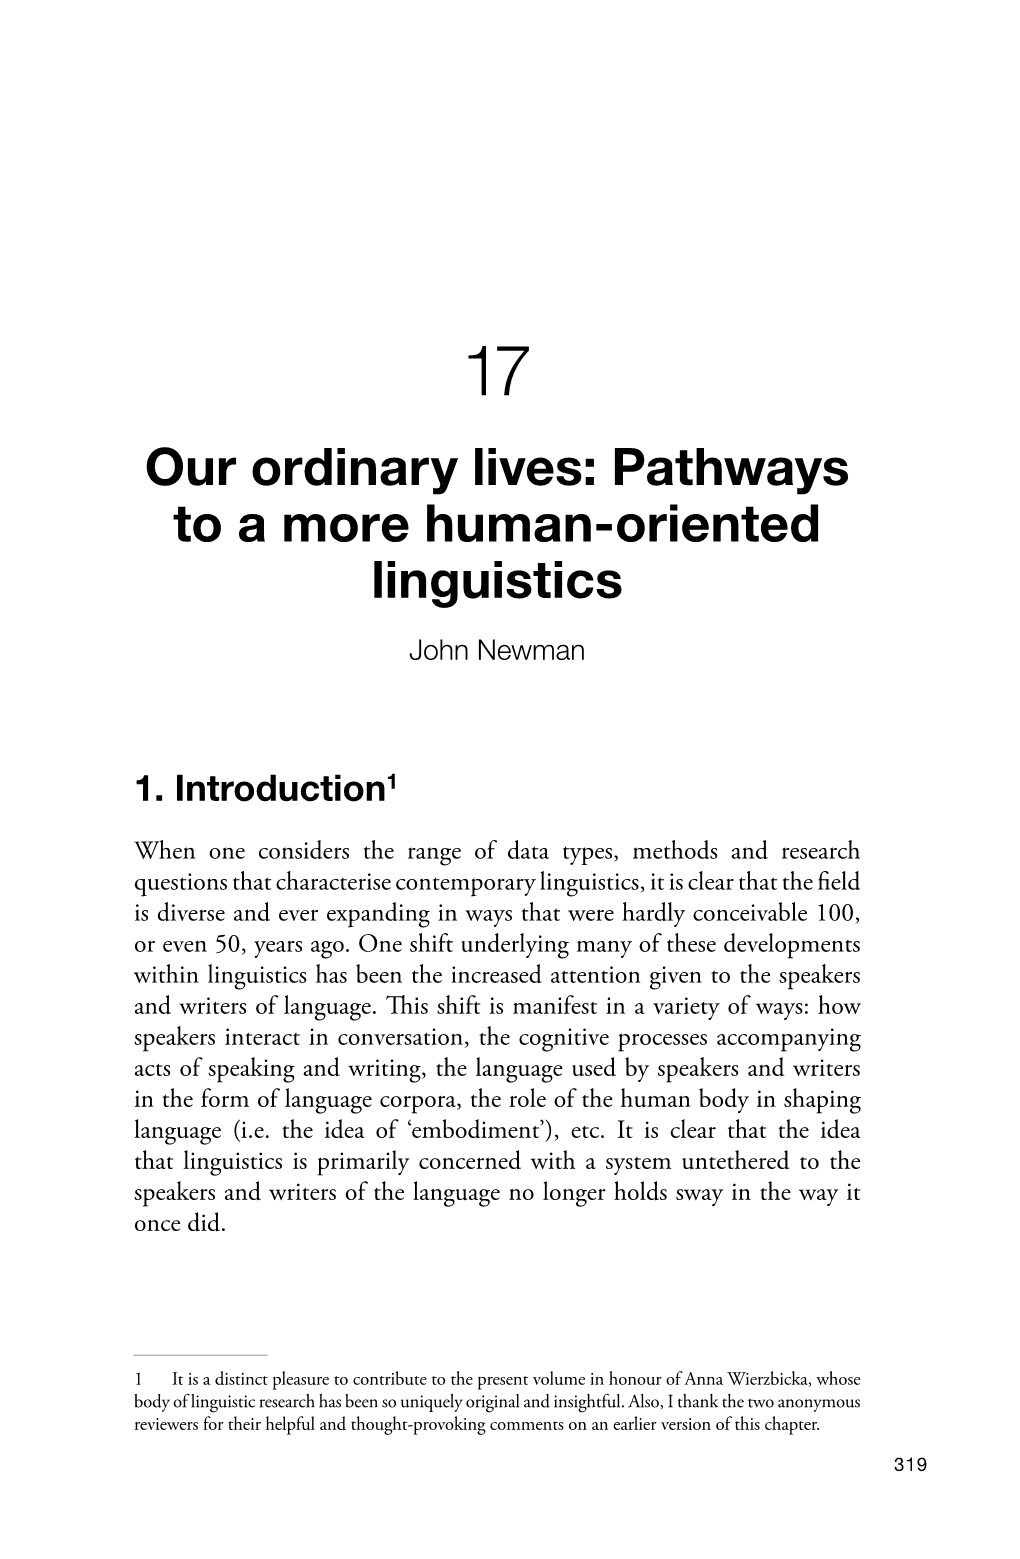 Our Ordinary Lives: Pathways to a More Human-Oriented Linguistics John Newman